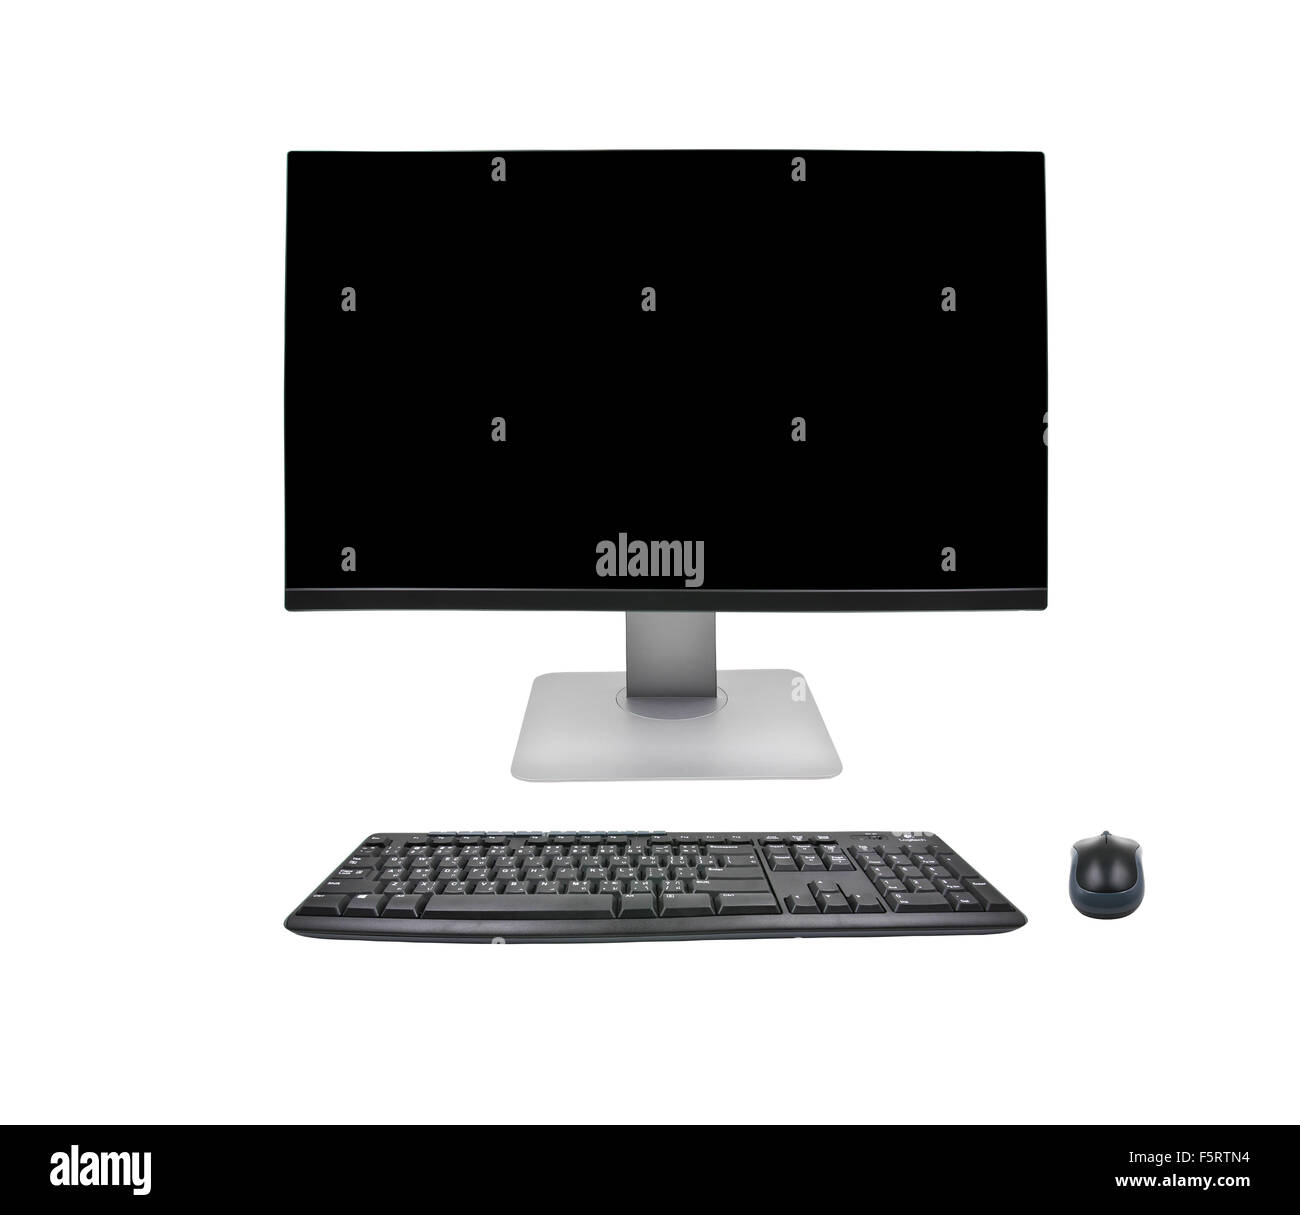 Desktop computer and keyboard and mouse on white background Stock Photo